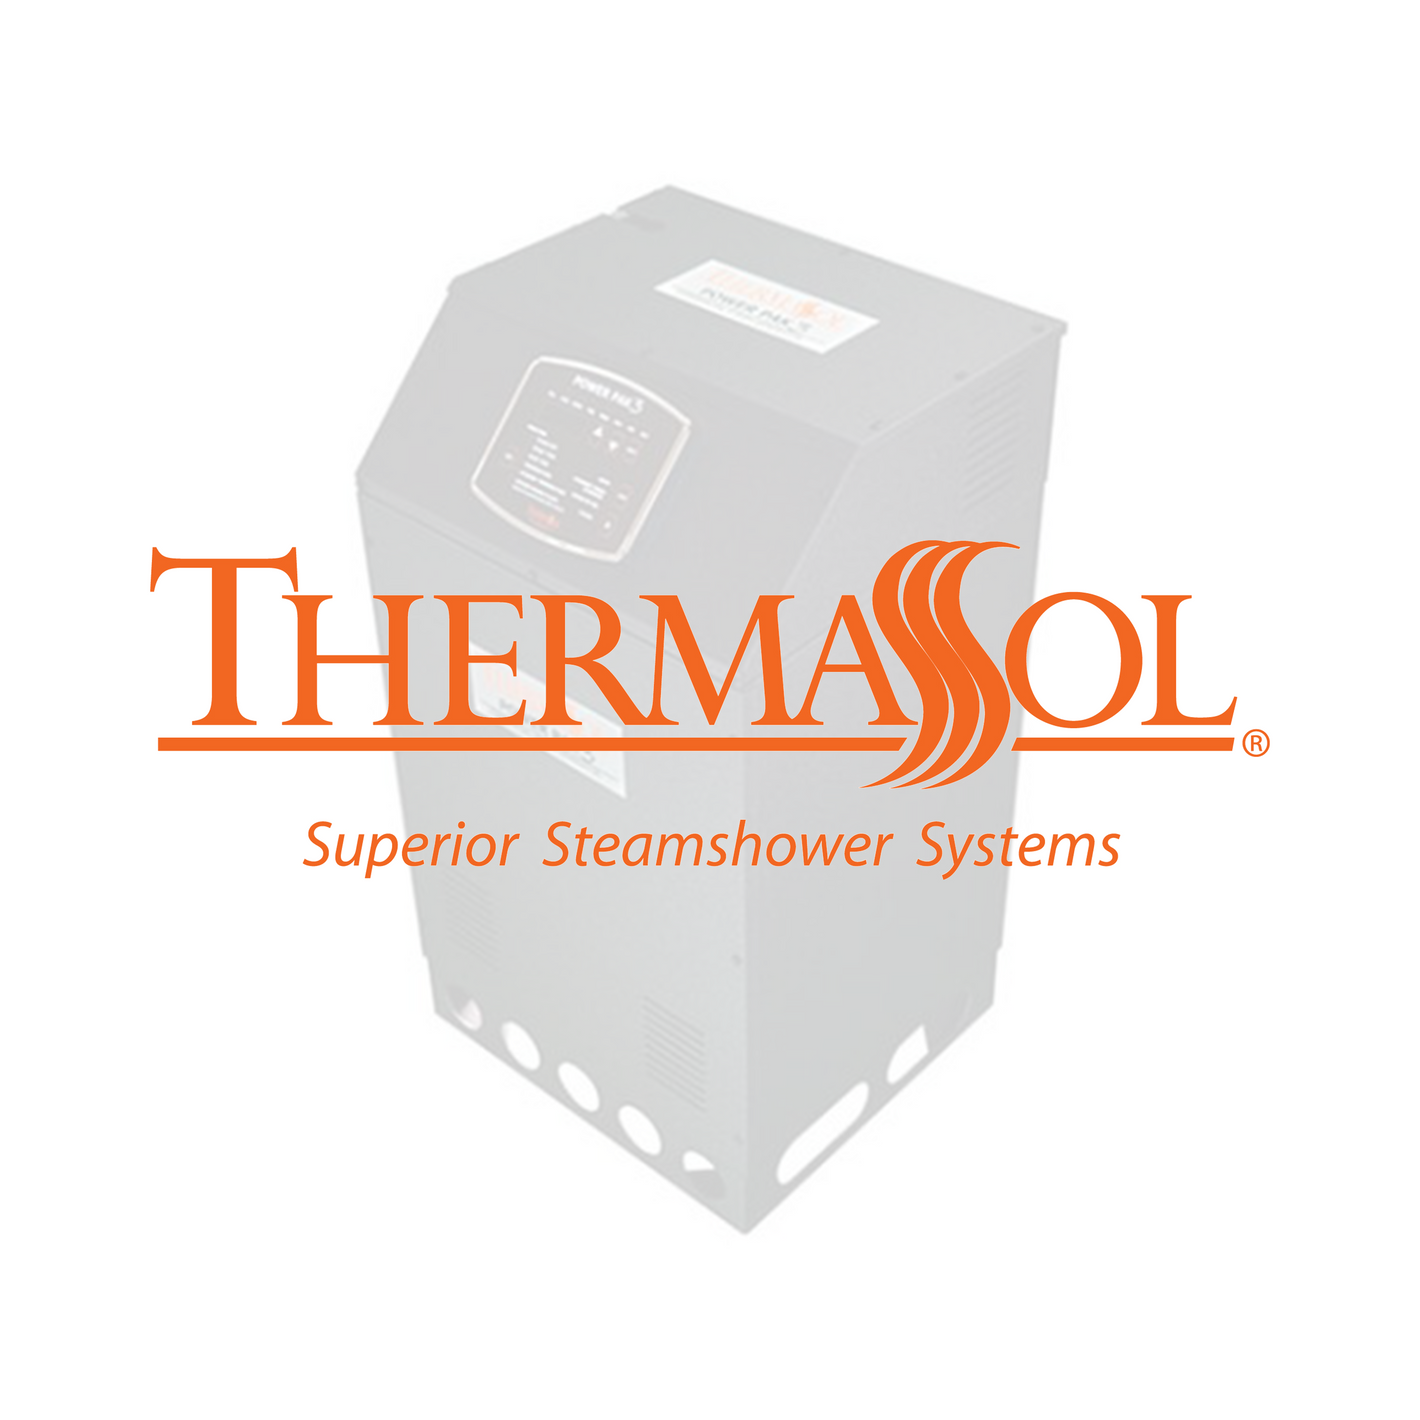 ThermaSol Residential Steam